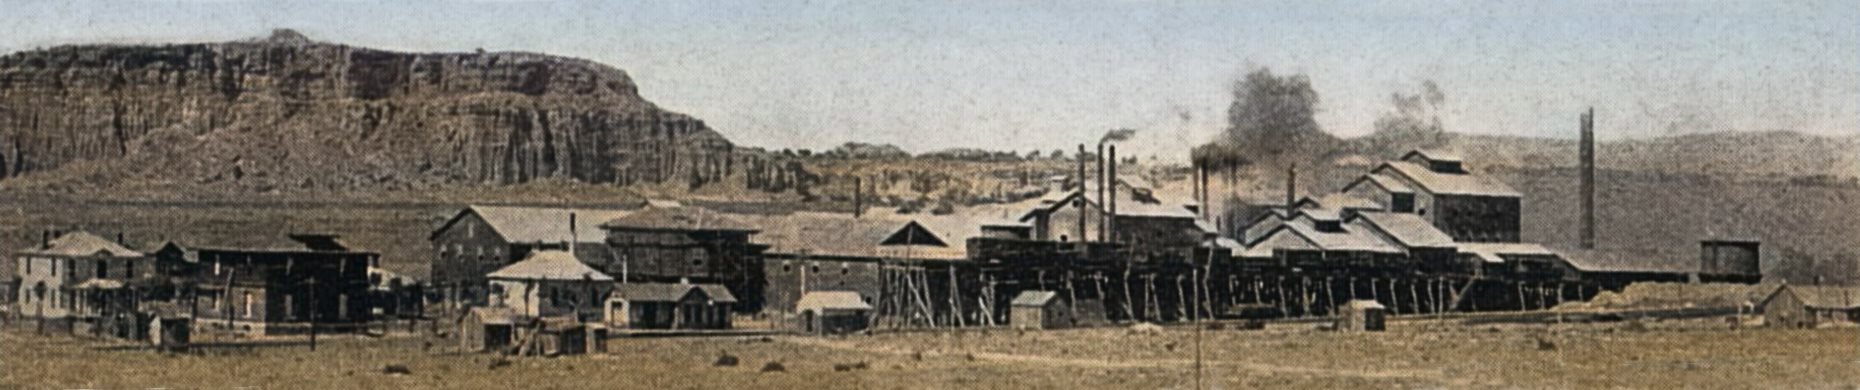 The works of the Metallic Extraction Co., the Bi-Metallic or just Metallic Mill, was situated at Cyanide, Colorado. A station that was on the Florence & Cripple Creek Railway, about 35 miles from the Cripple Creek District mines and two miles from Florence. Back in 1898 this was the oil center of Colorado, and hence was looked at as an ideal location as that part of the valley of the Arkansas had cheap and abundant  supply of coal and oil, and labor was plentiful.
   The works was erected on a flat site, following the opinion of Philip Argall that a flat site is preferable to a slope or terrace, since on the former works can be laid out not only to the best advantage but also can be operated at less expense. Ore from the Cripple Creek mines was delivered by the railway company on a double-track trestle that was at the two sampling works in use at this mill 20 ft. above the floor line of the works.
   View shows a mill work that covered quite a large site, where the mainline of the F. & C.C. ran in the foreground and the before mentioned trestle can be seen on the right half part of the image, about 1/3 up from bottom.
   I did procure the colored version of this image. Source was gray-toned, or in common speech black & white. Used an online service and tweaked and worked with image to get what looks best to my eyes for the moment.